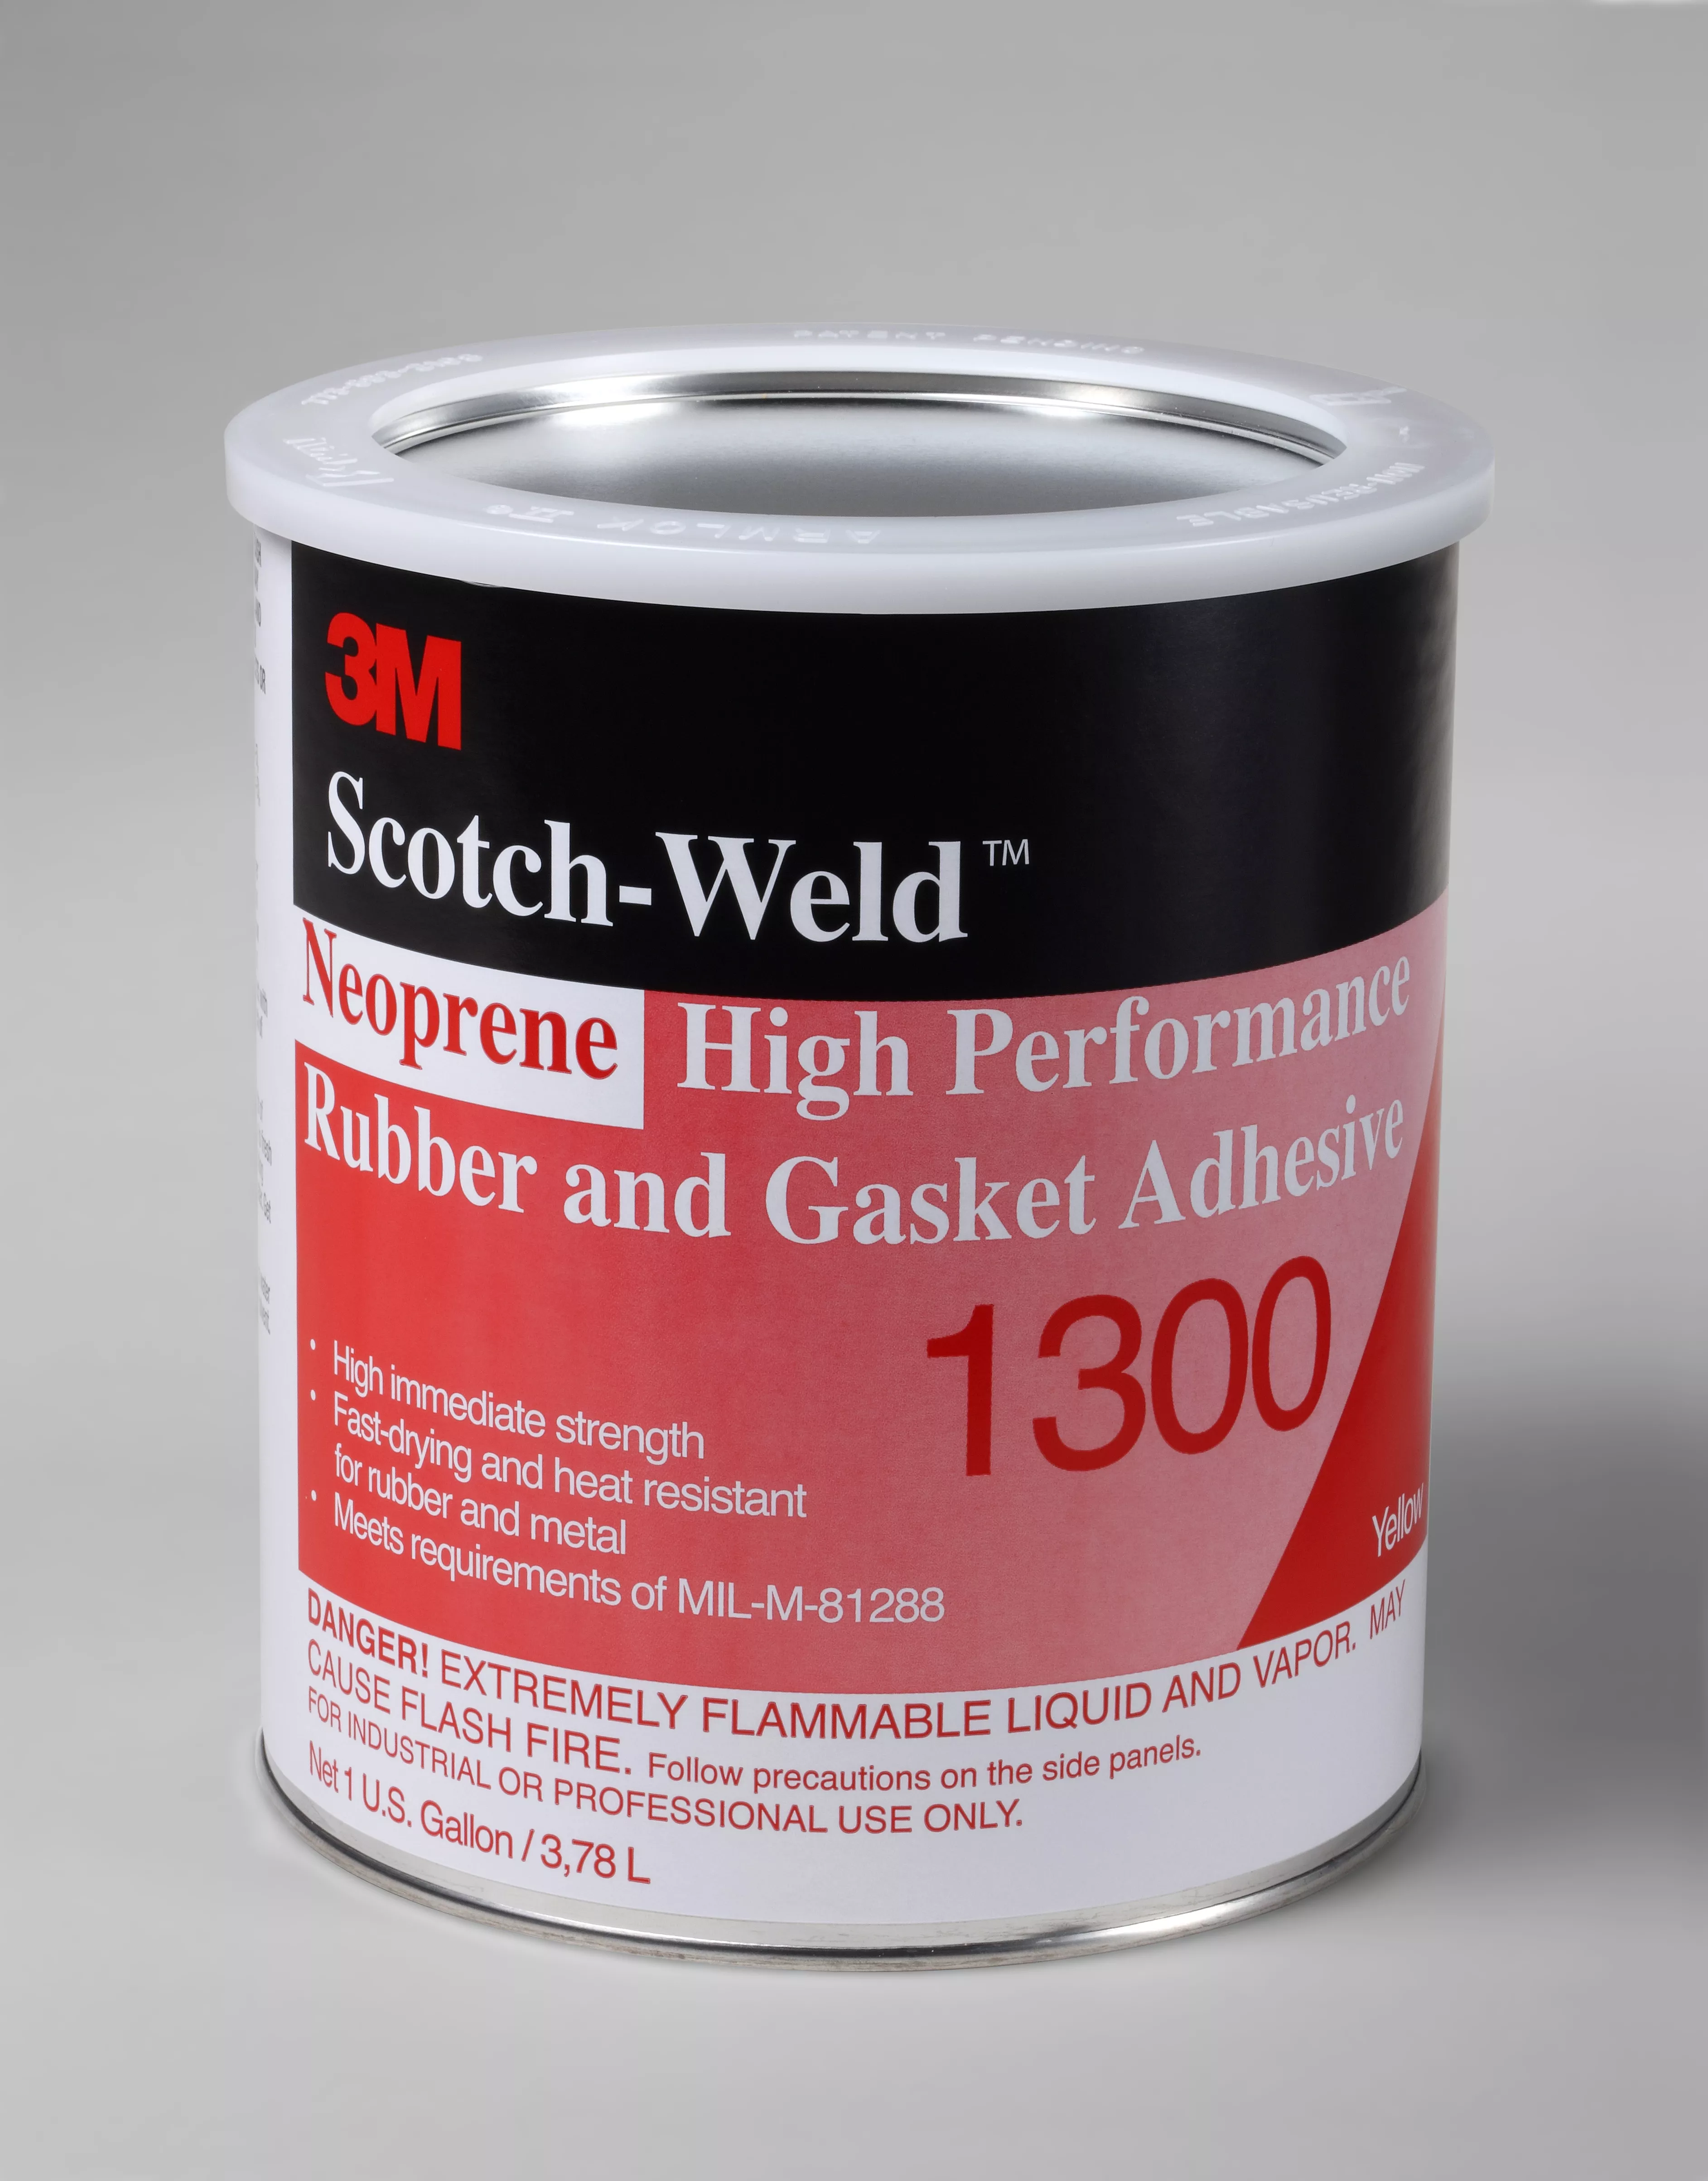 3M™ Neoprene High Performance Rubber and Gasket Adhesive 1300, Yellow, 1
Gallon, 4 Drum/Case